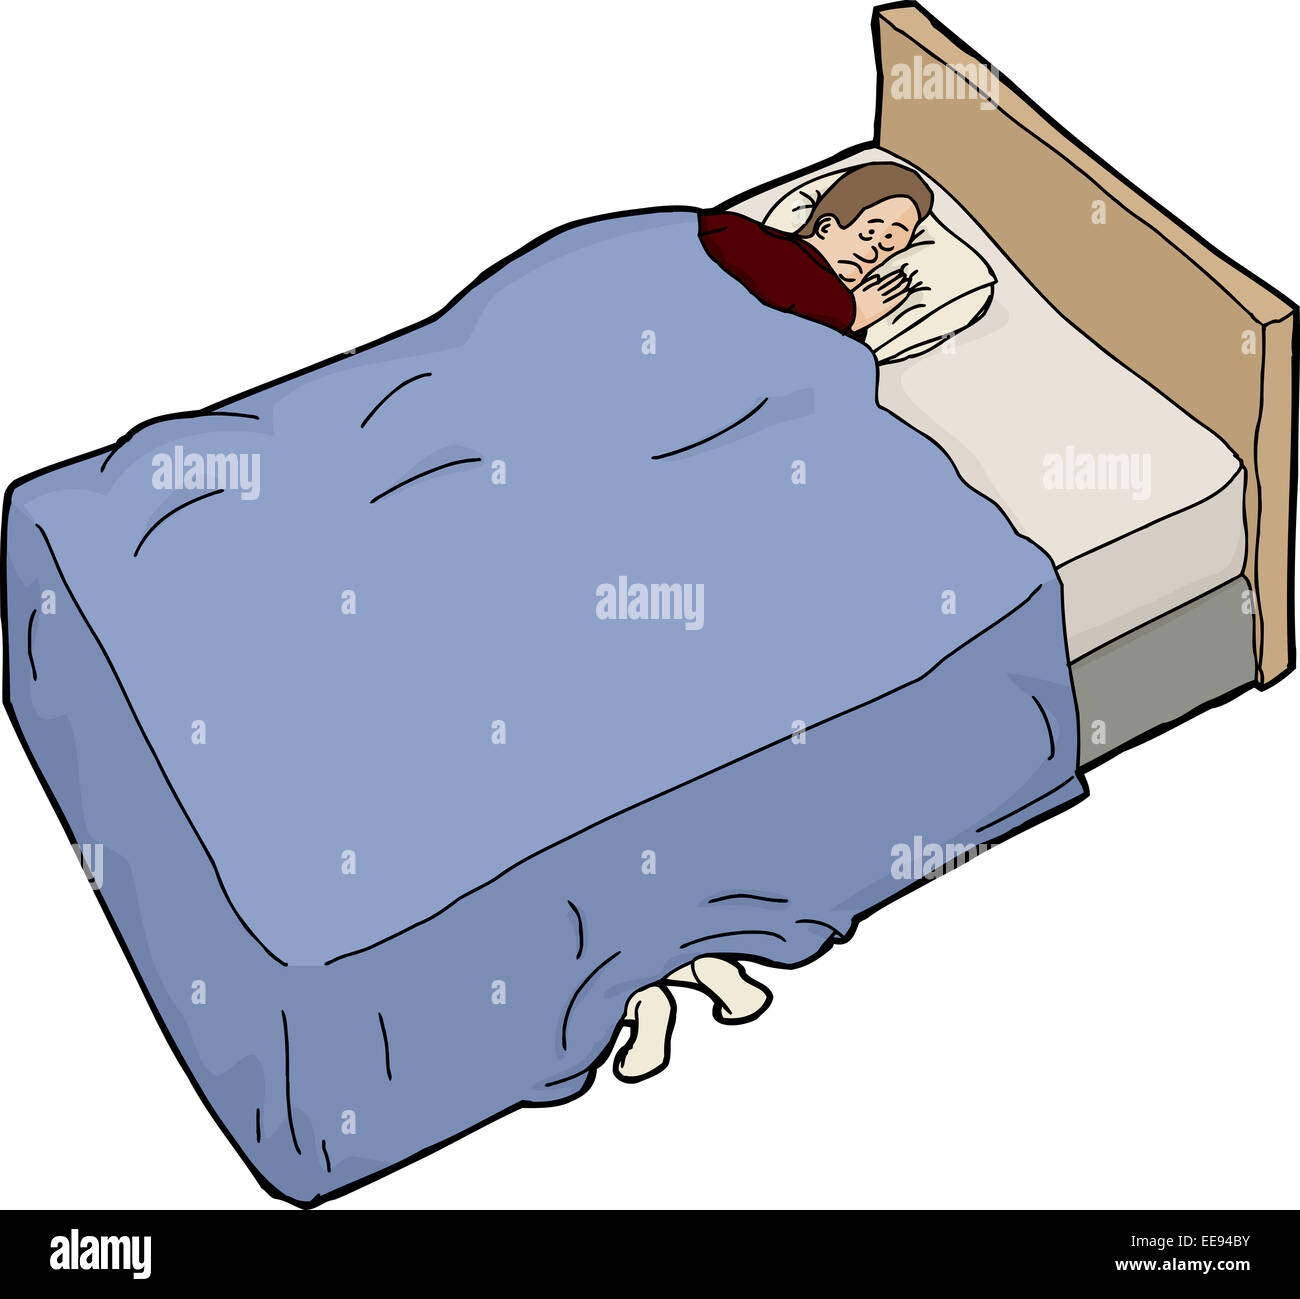 Isolated cartoon bed with scared man and feet underneath Stock Photo